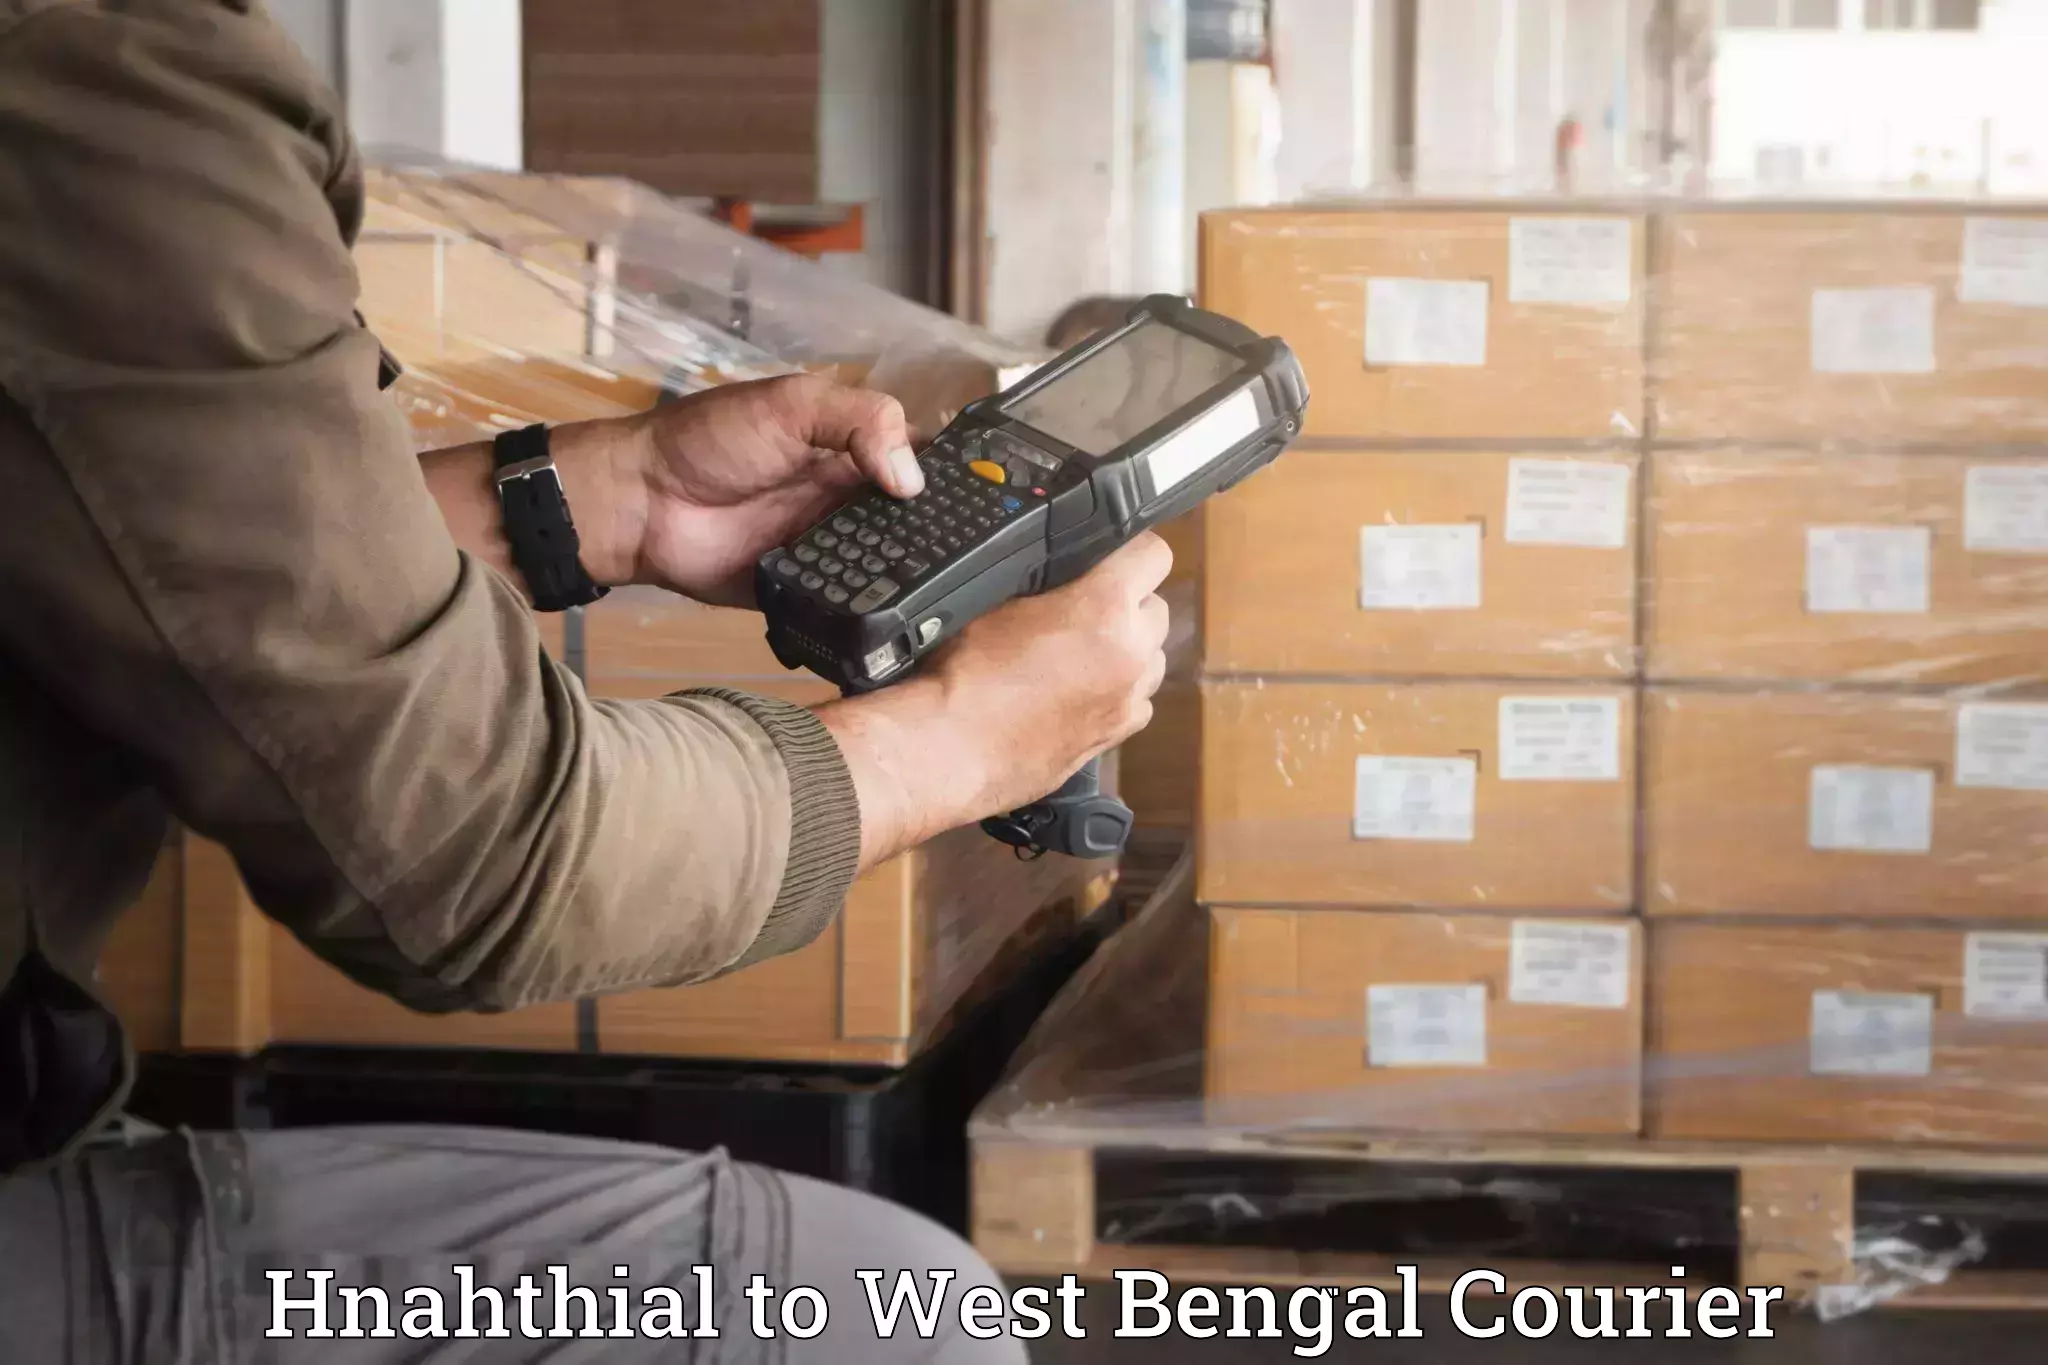 Furniture relocation experts Hnahthial to West Bengal